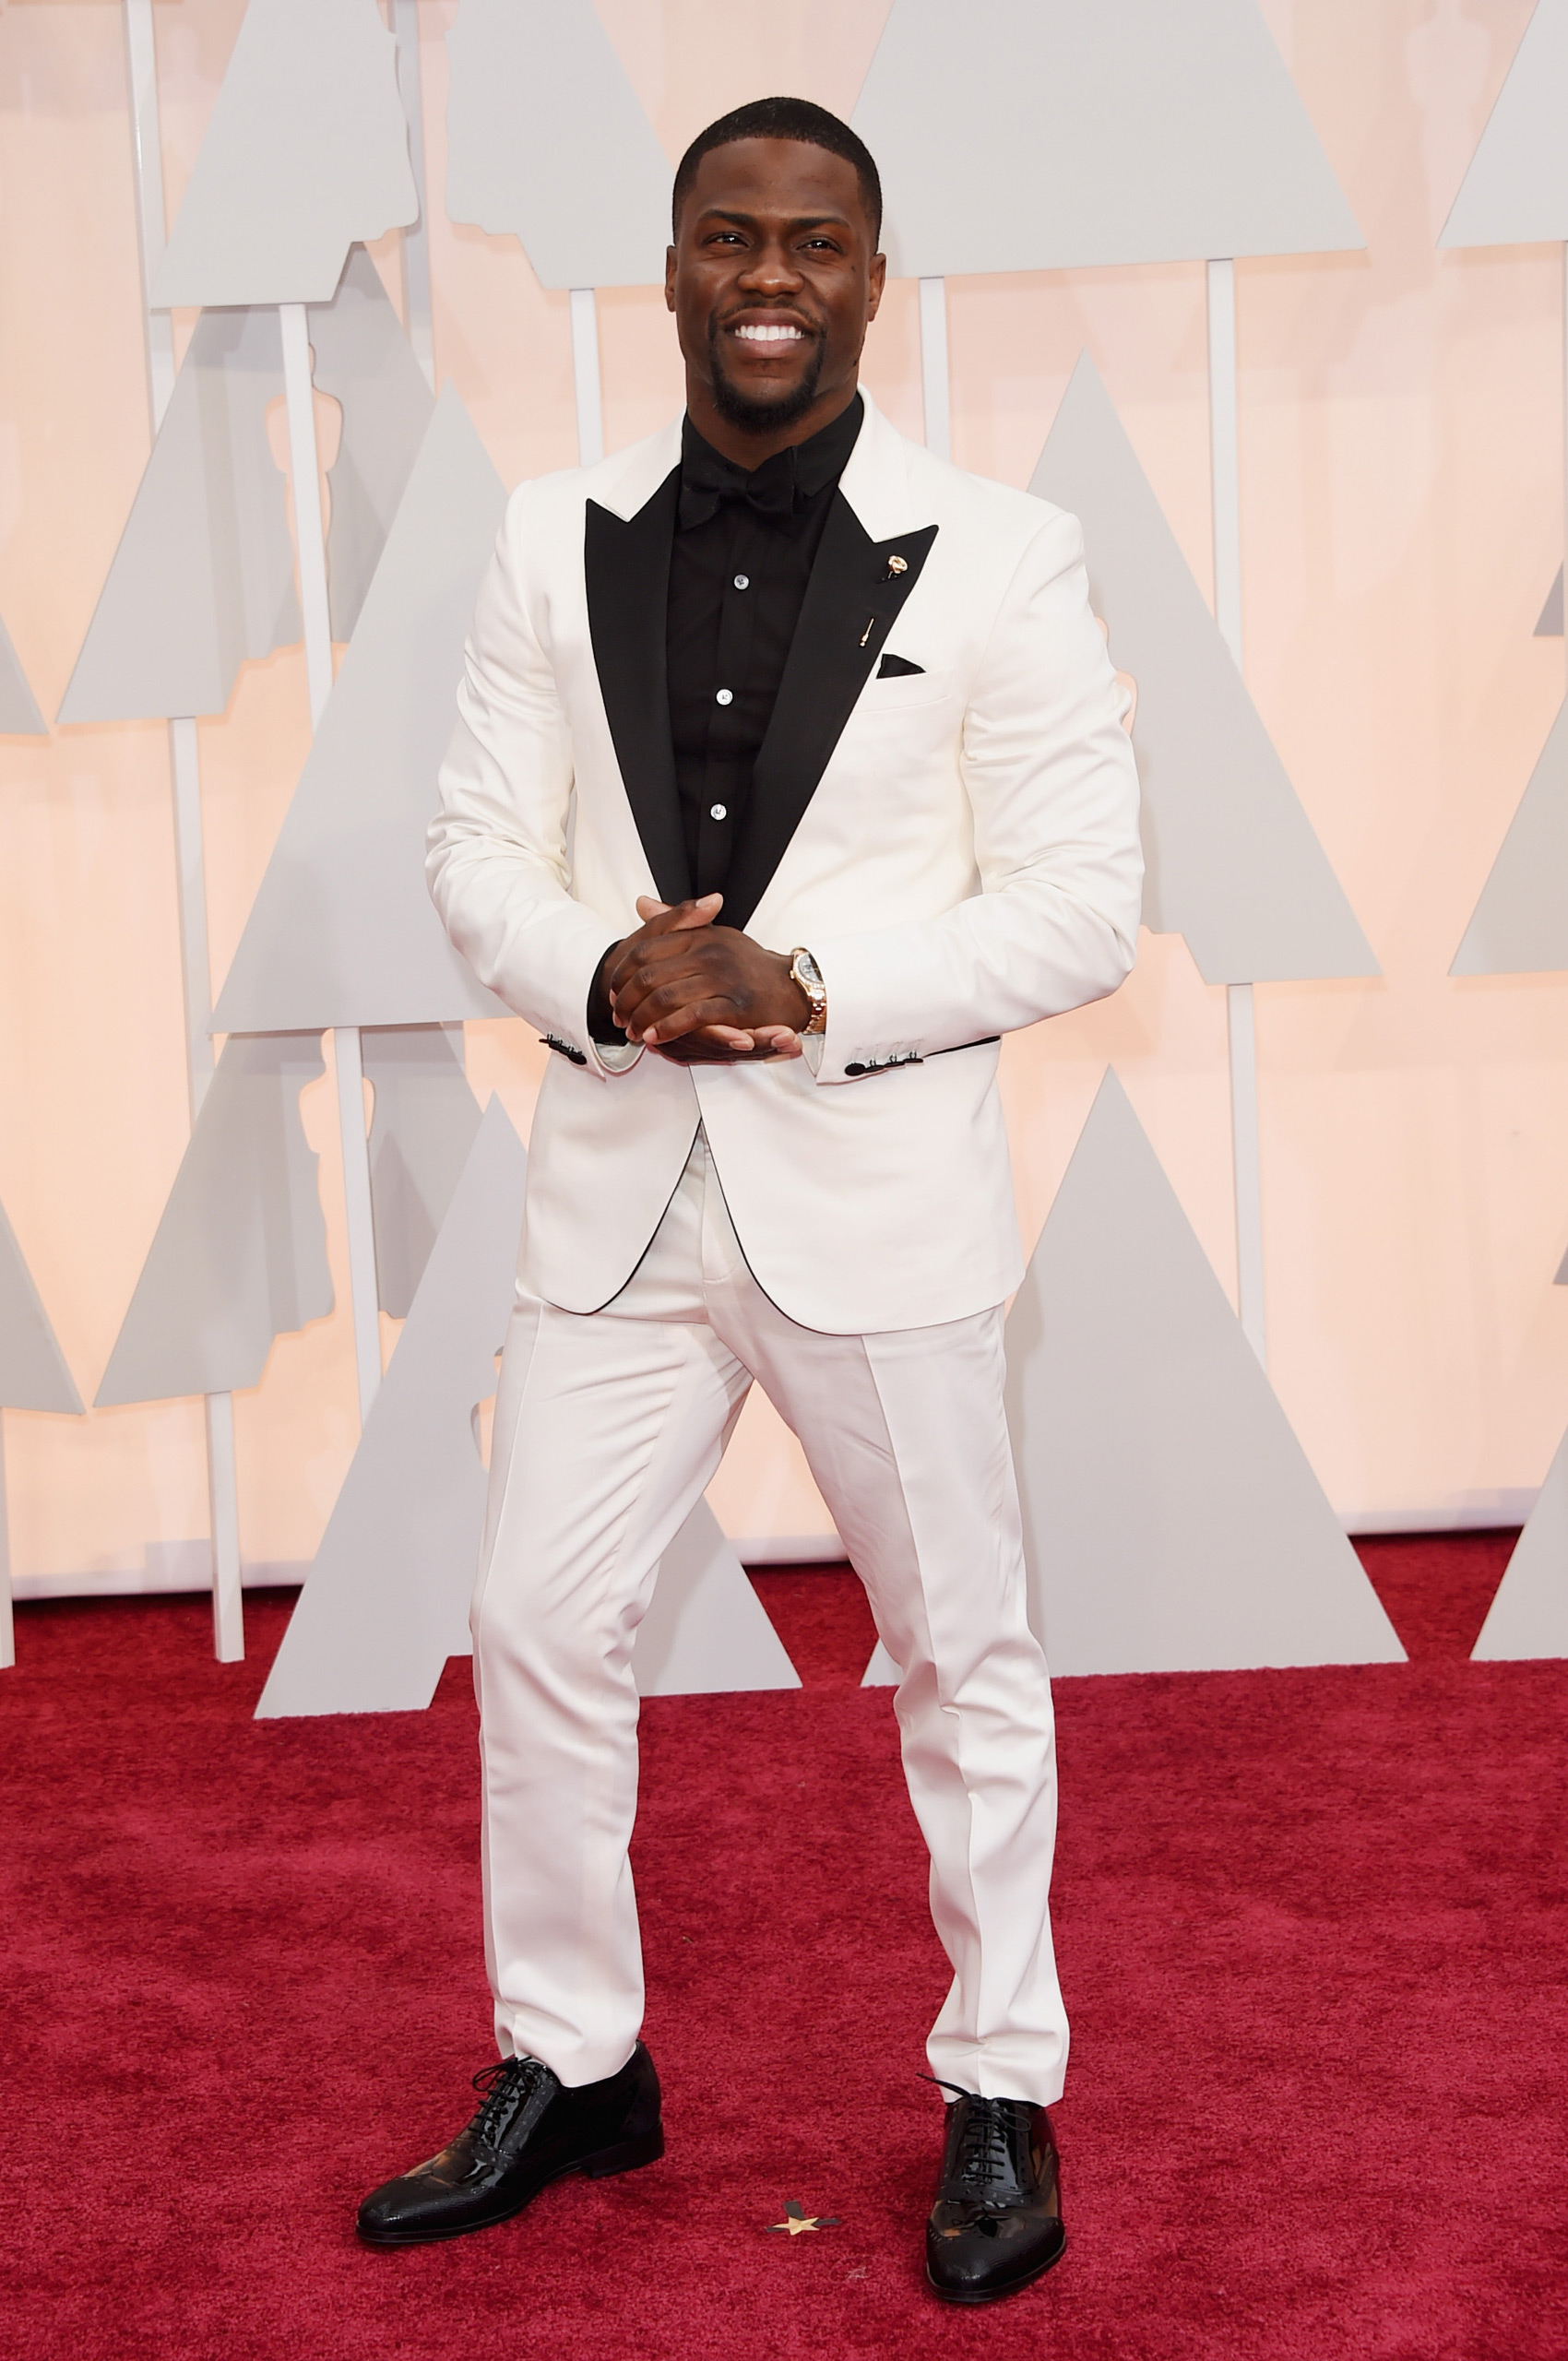 Kevin Hart attends the 87th Annual Academy Awards on Feb. 22, 2015 in Hollywood, Calif.